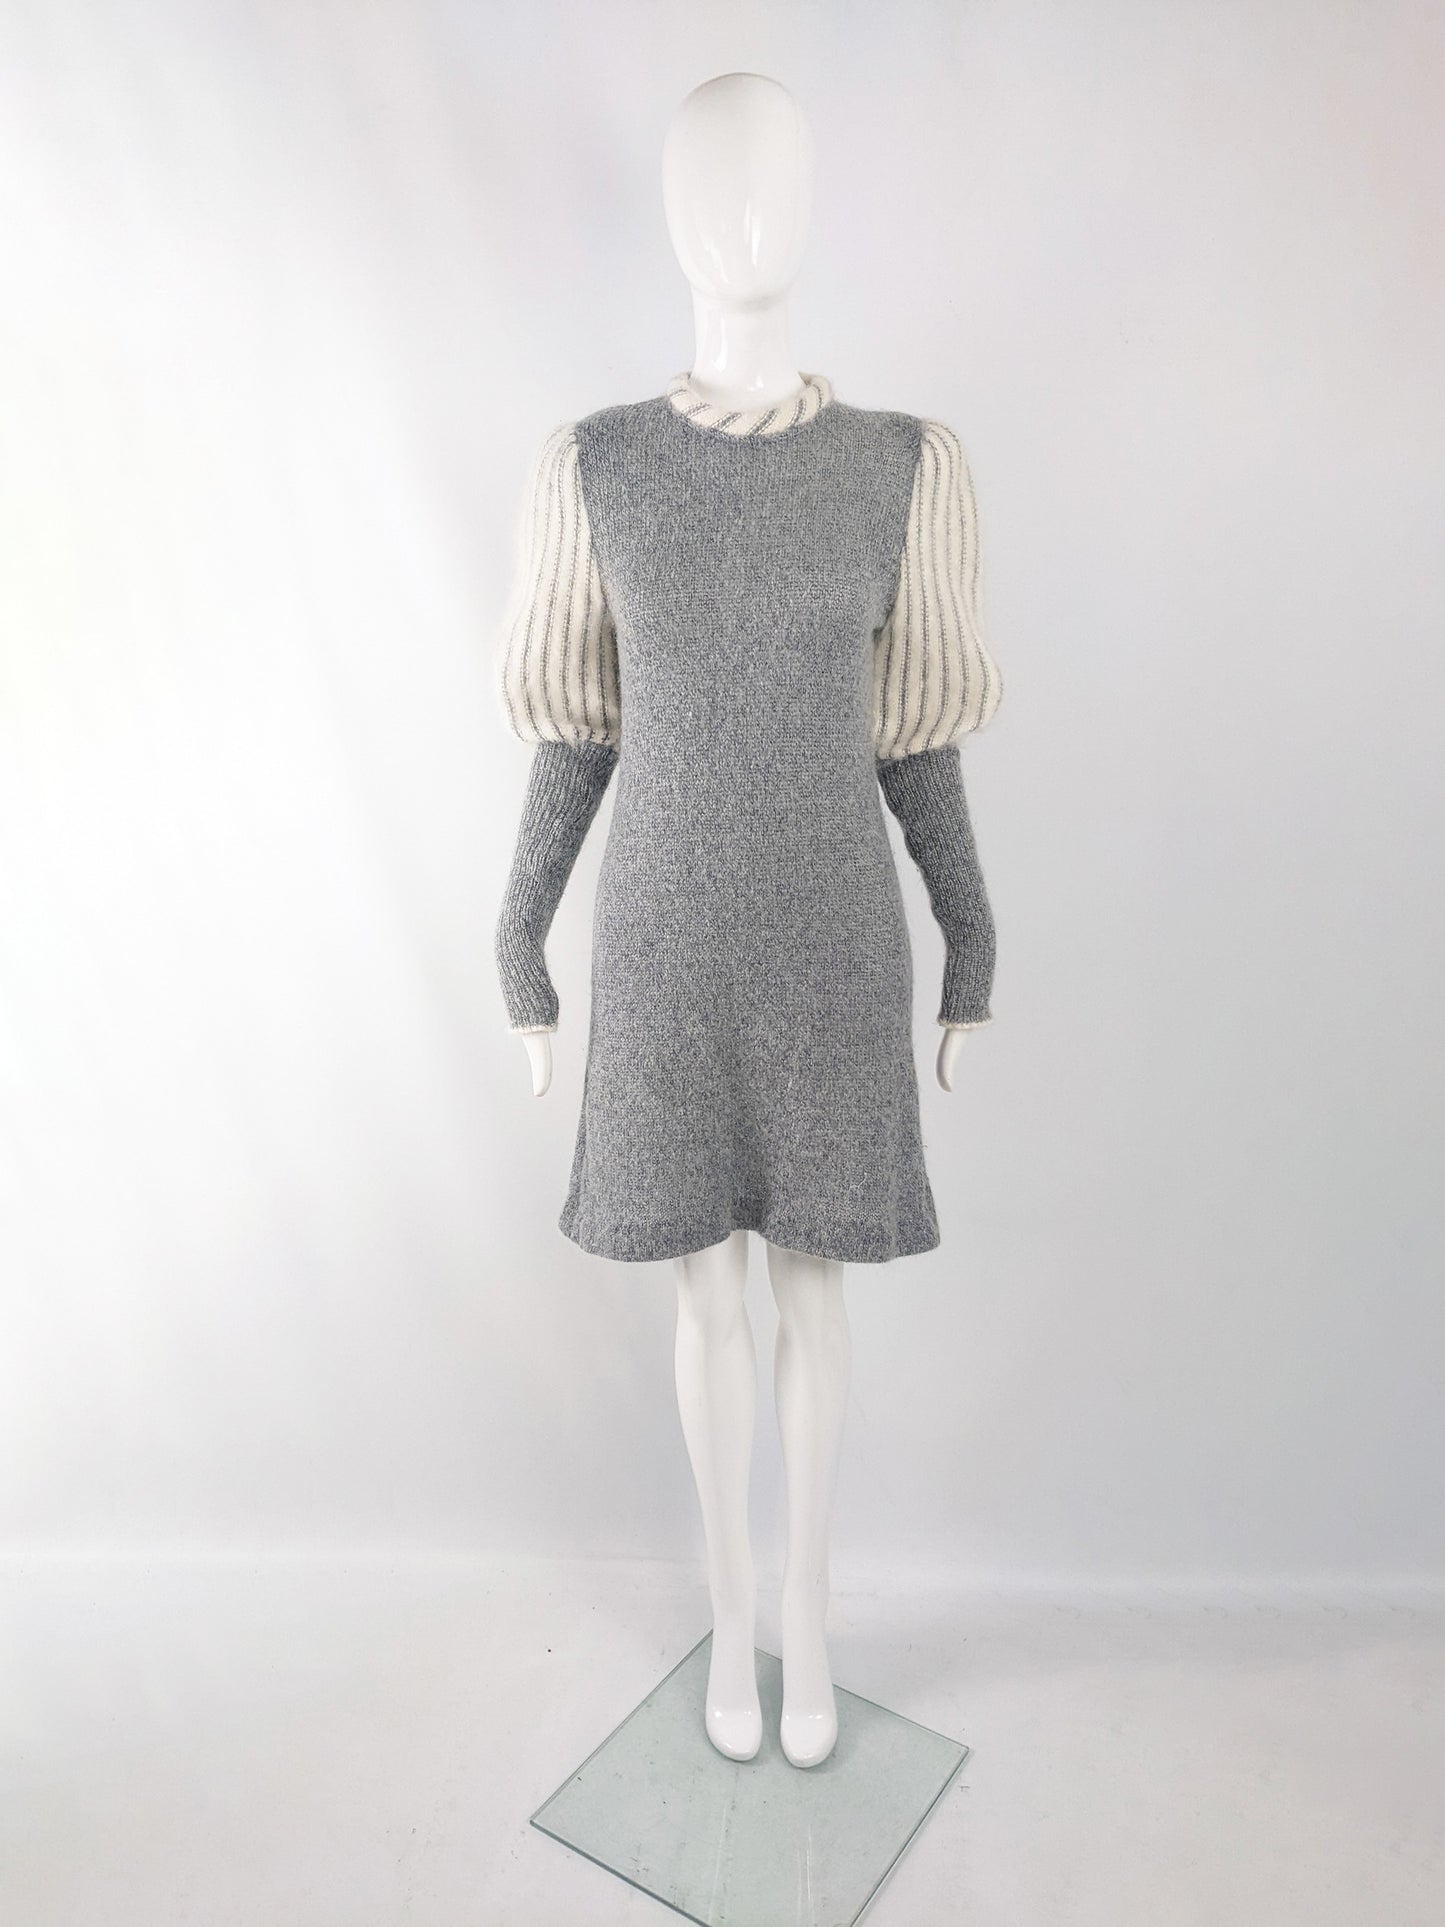 Carven Vintage Wool & Mohair Knit Dress, 1970s